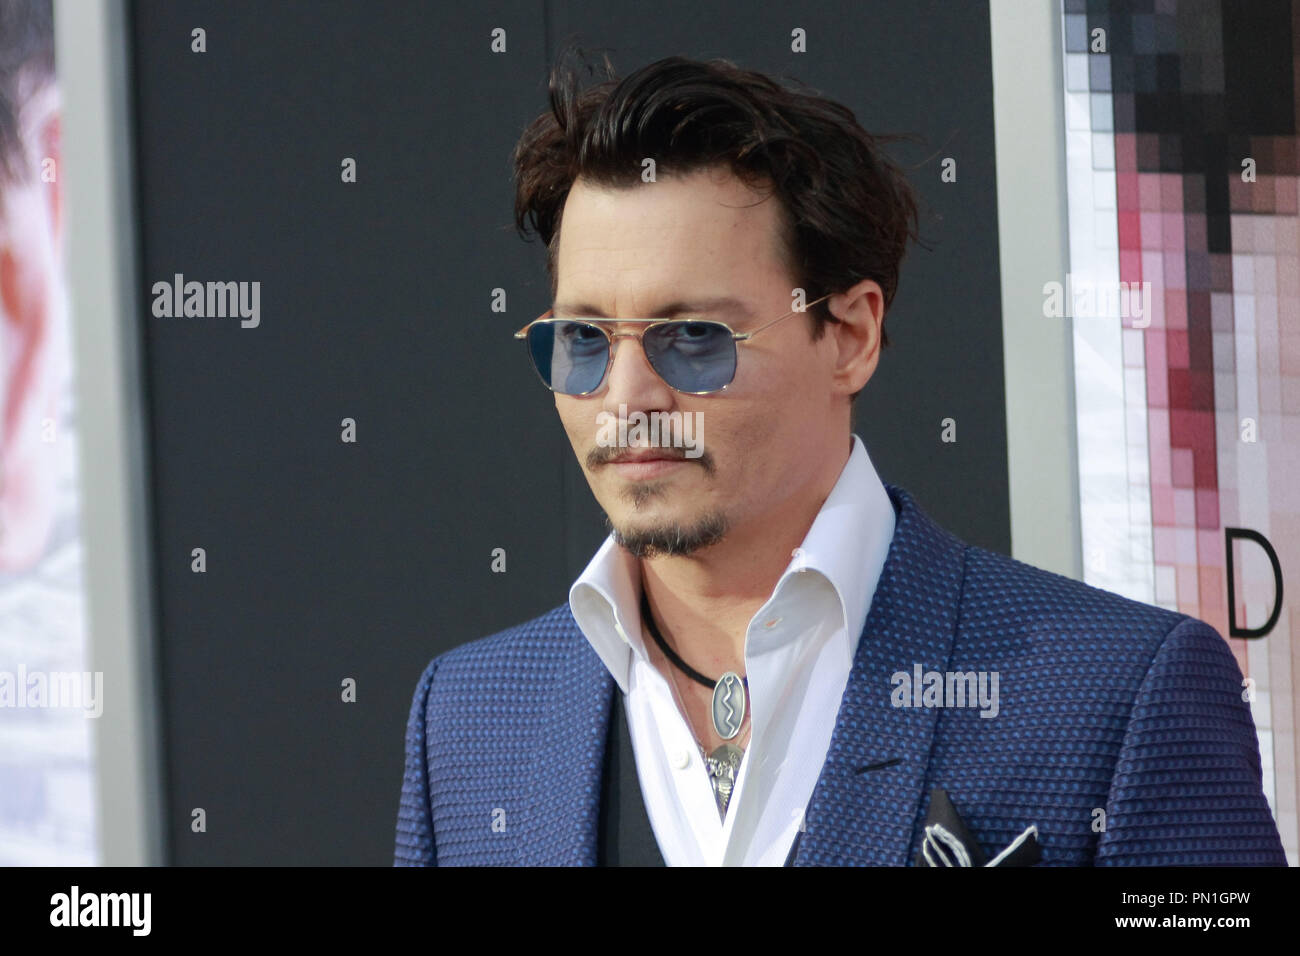 Johnny Depp at the Warner Brothers Pictures premiere of 'Transcendence'. Arrivals held at Regency Village Theatre in Westwood, CA, April 10, 2014. Photo by Joe Martinez / PictureLux Stock Photo